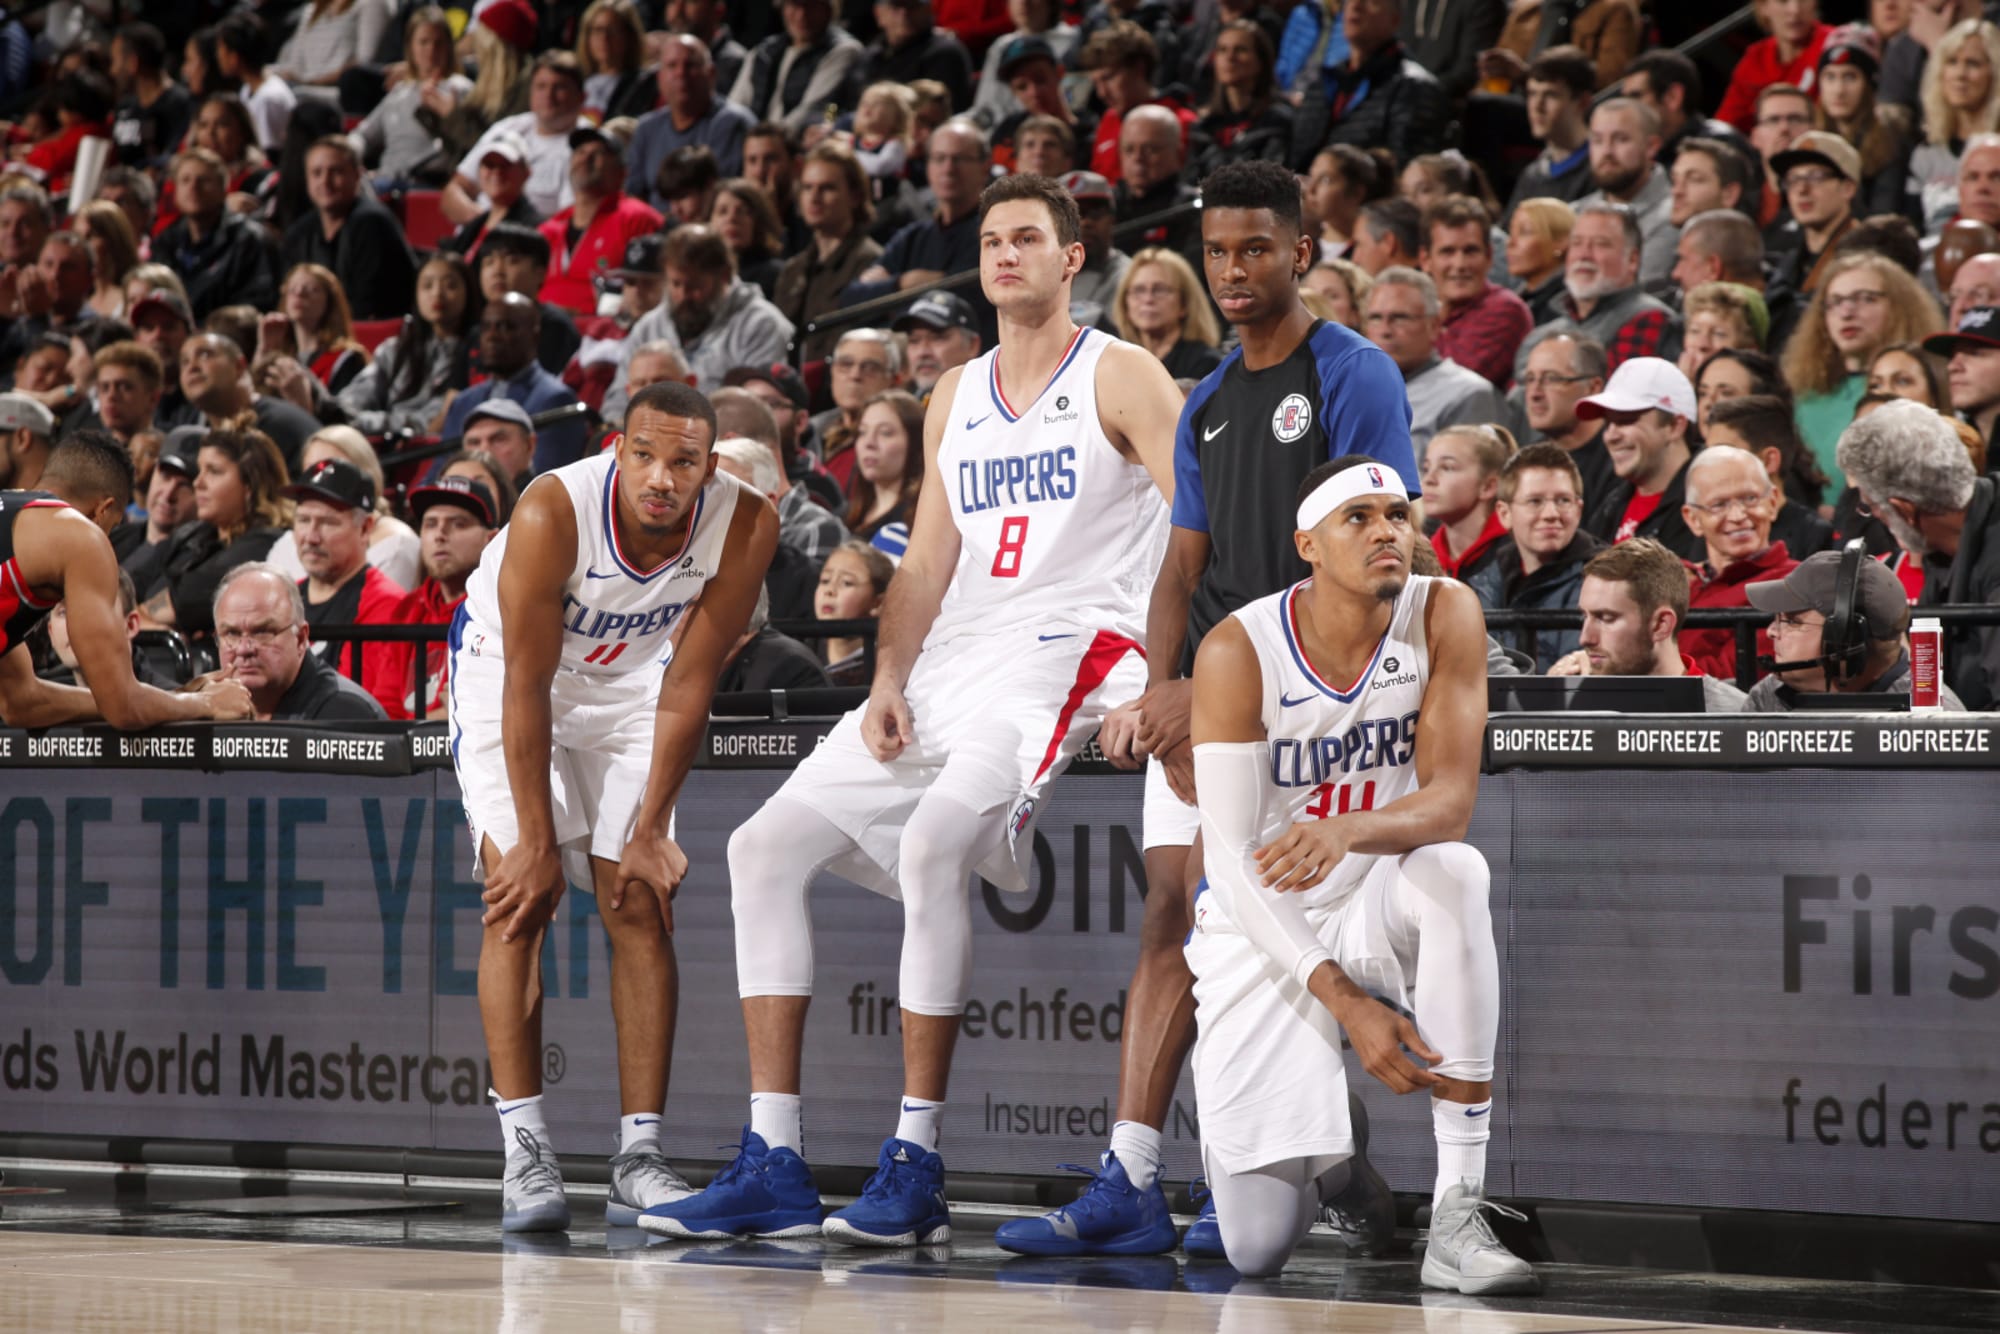 best lineup clippers